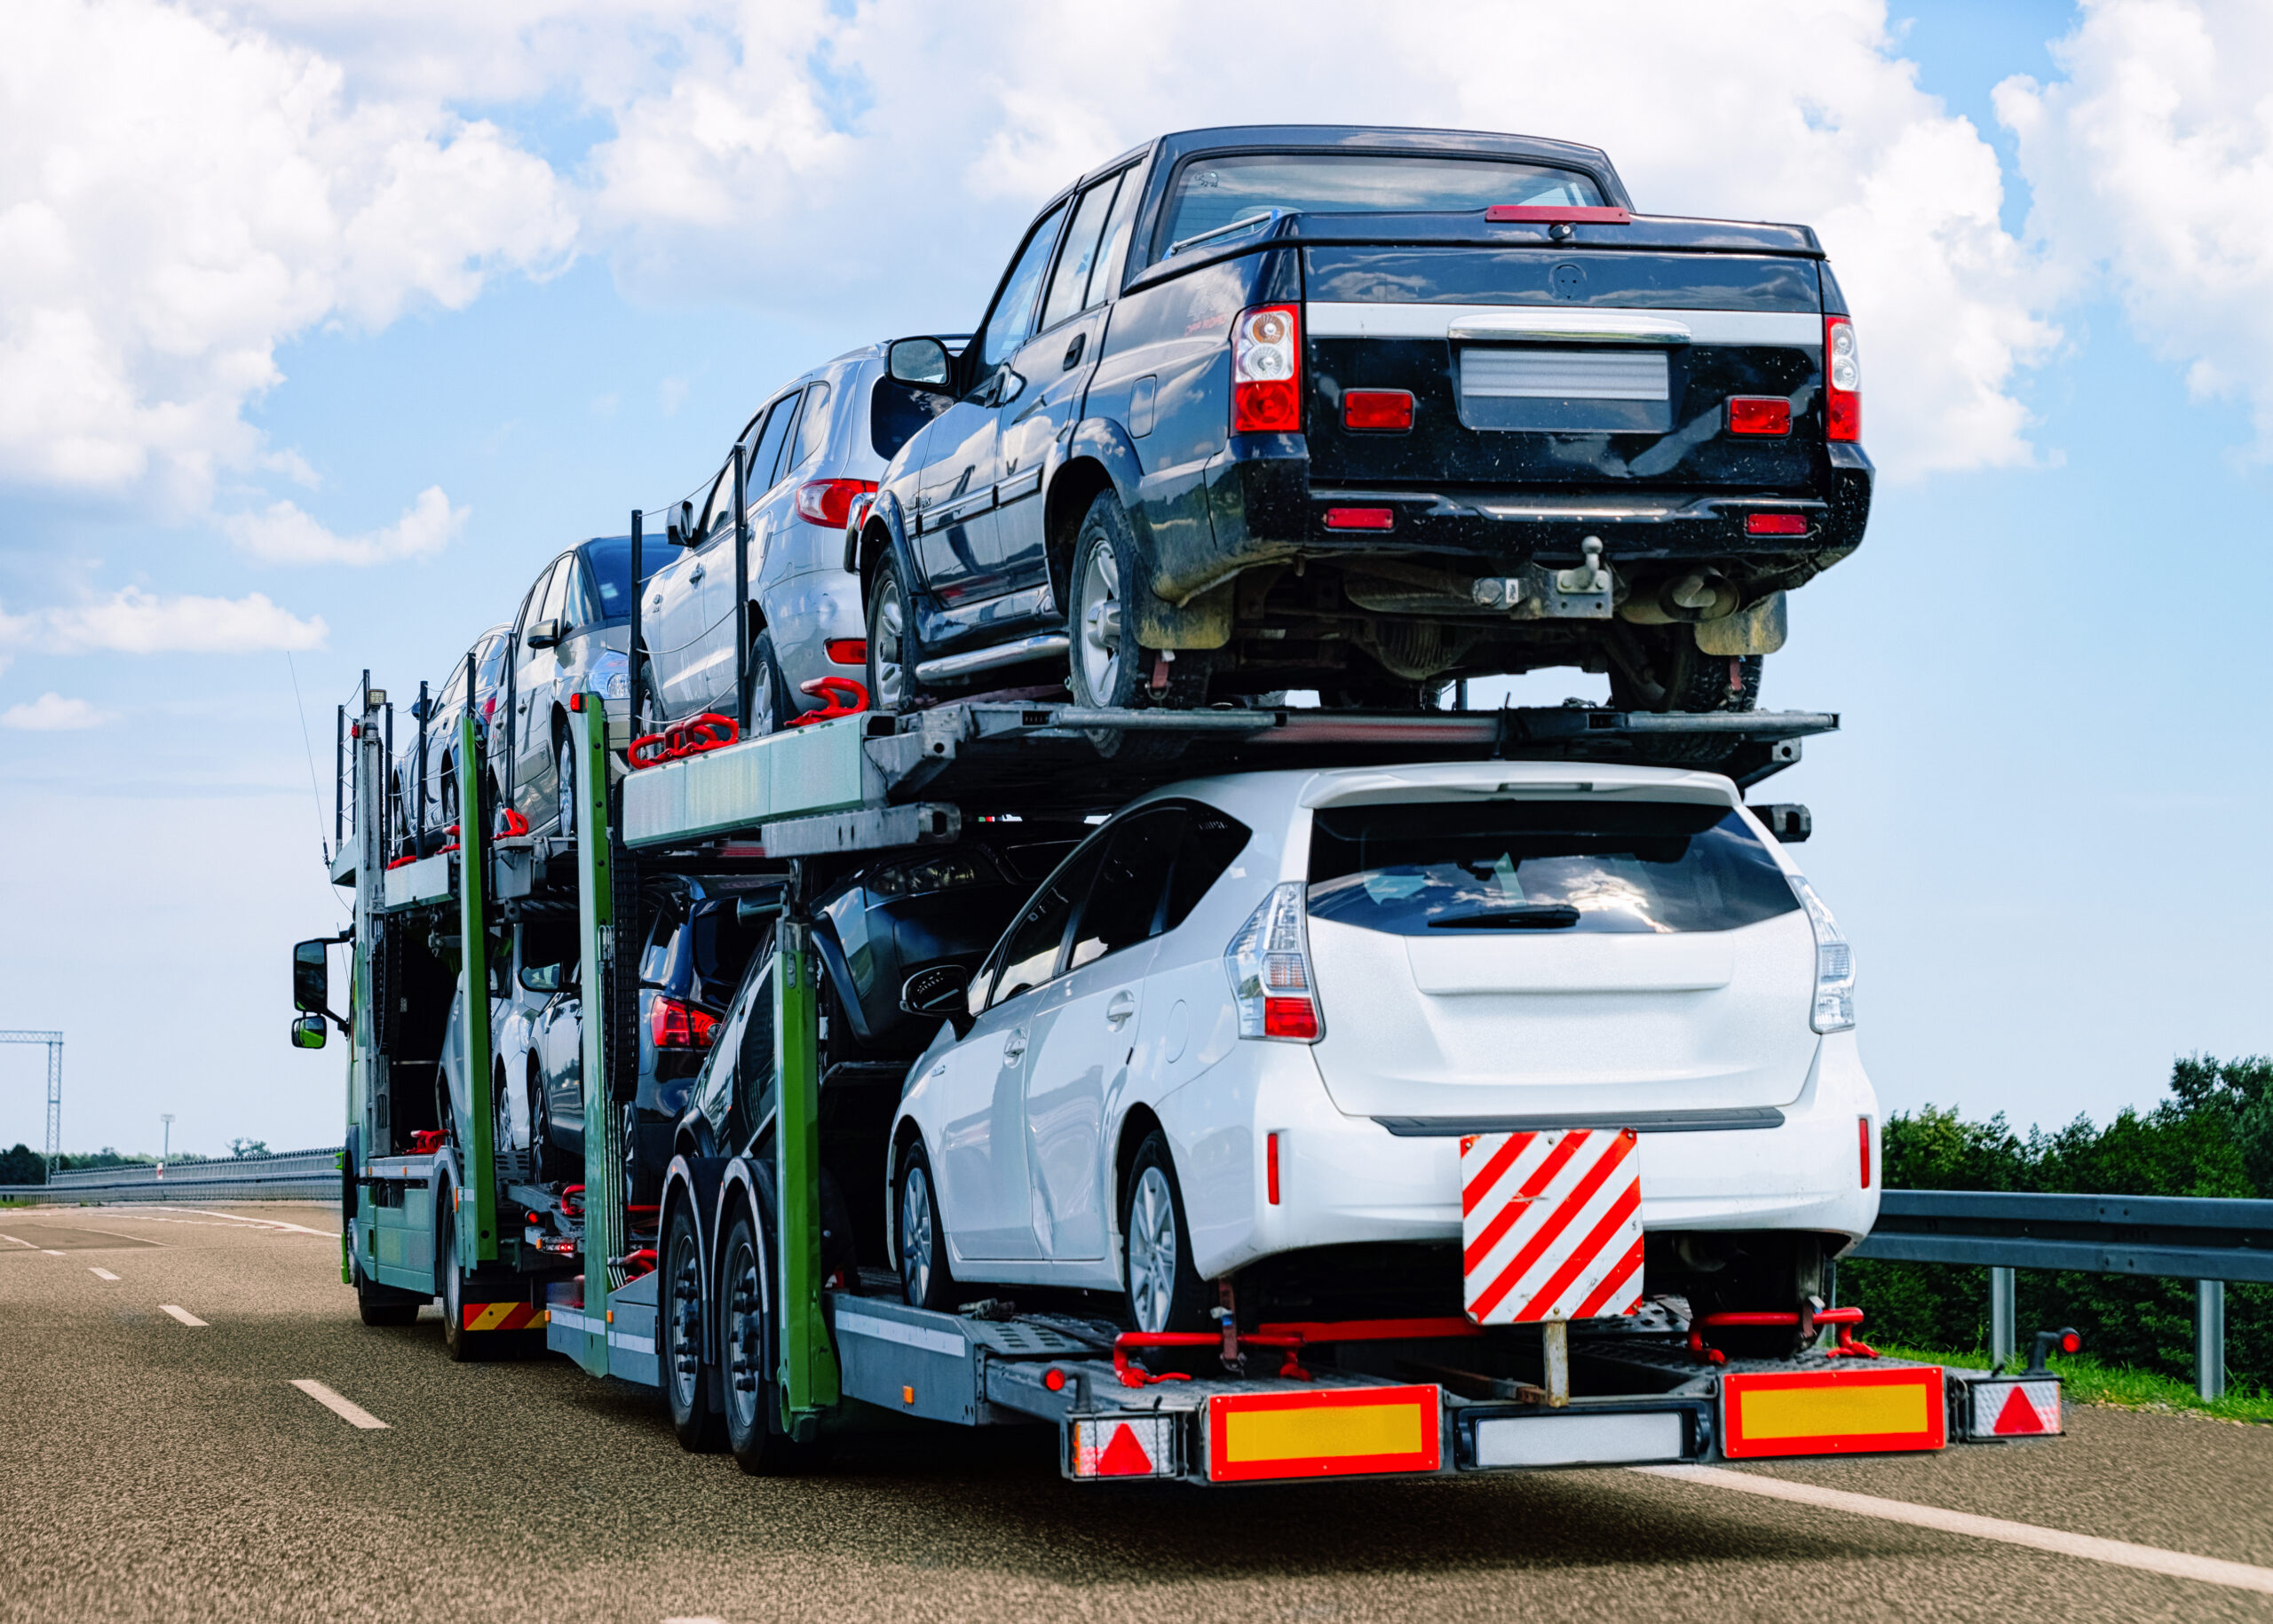 Auto Transport Essentials: Your Guide to Vehicle Shipping Options, Costs, and Preparation